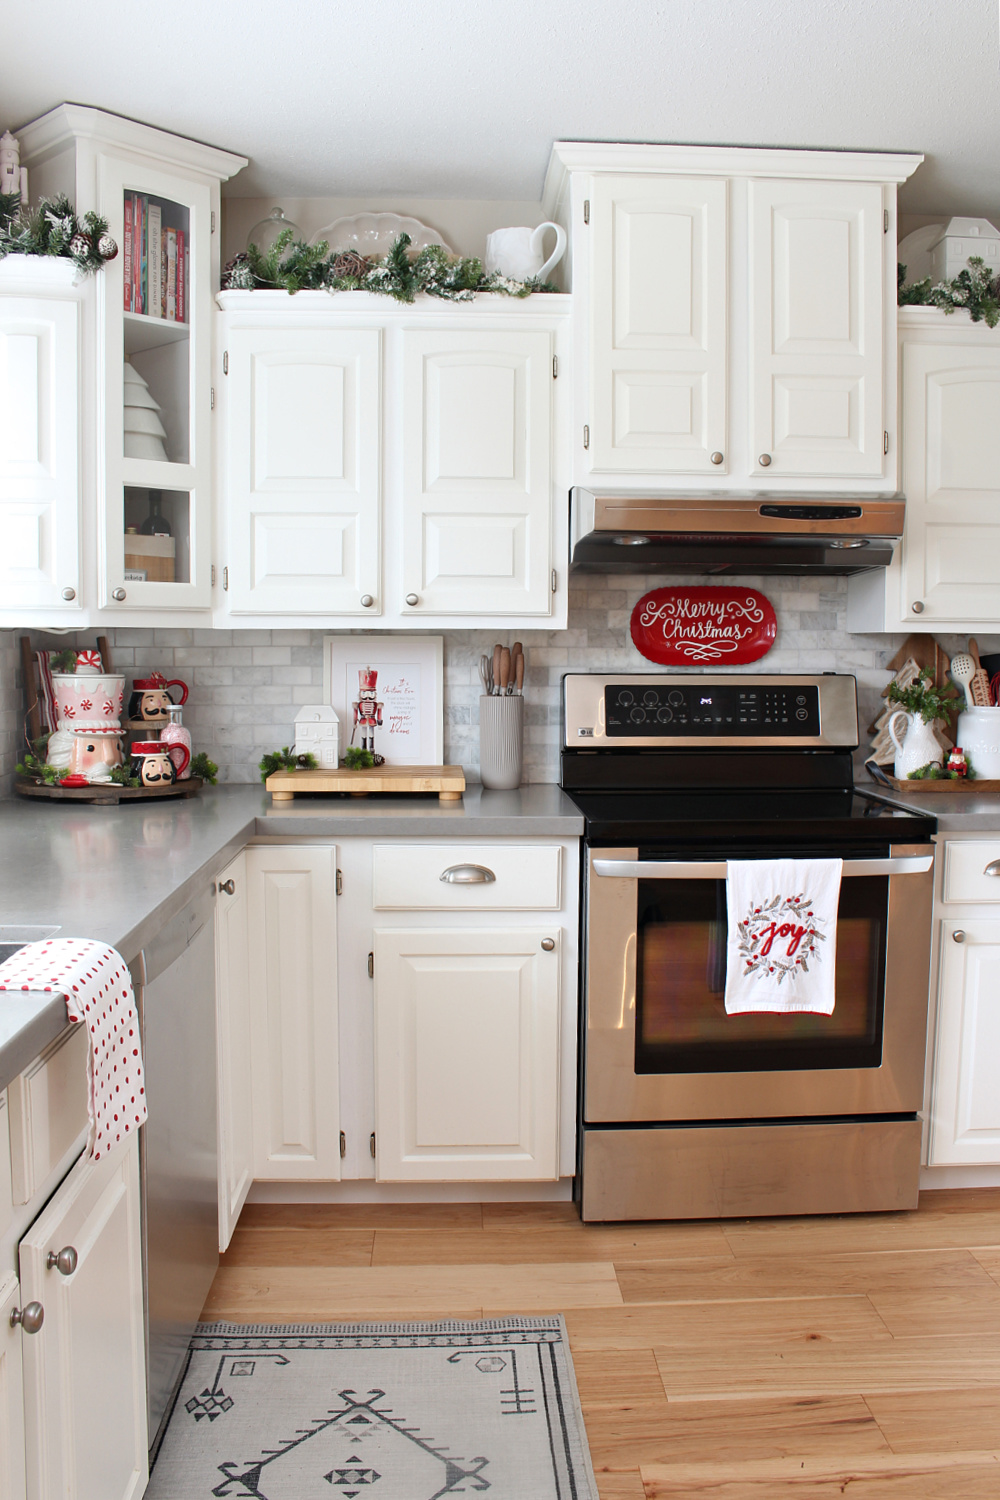 White kitchen dressed up for the holidays with Nutcracker inspired decor.